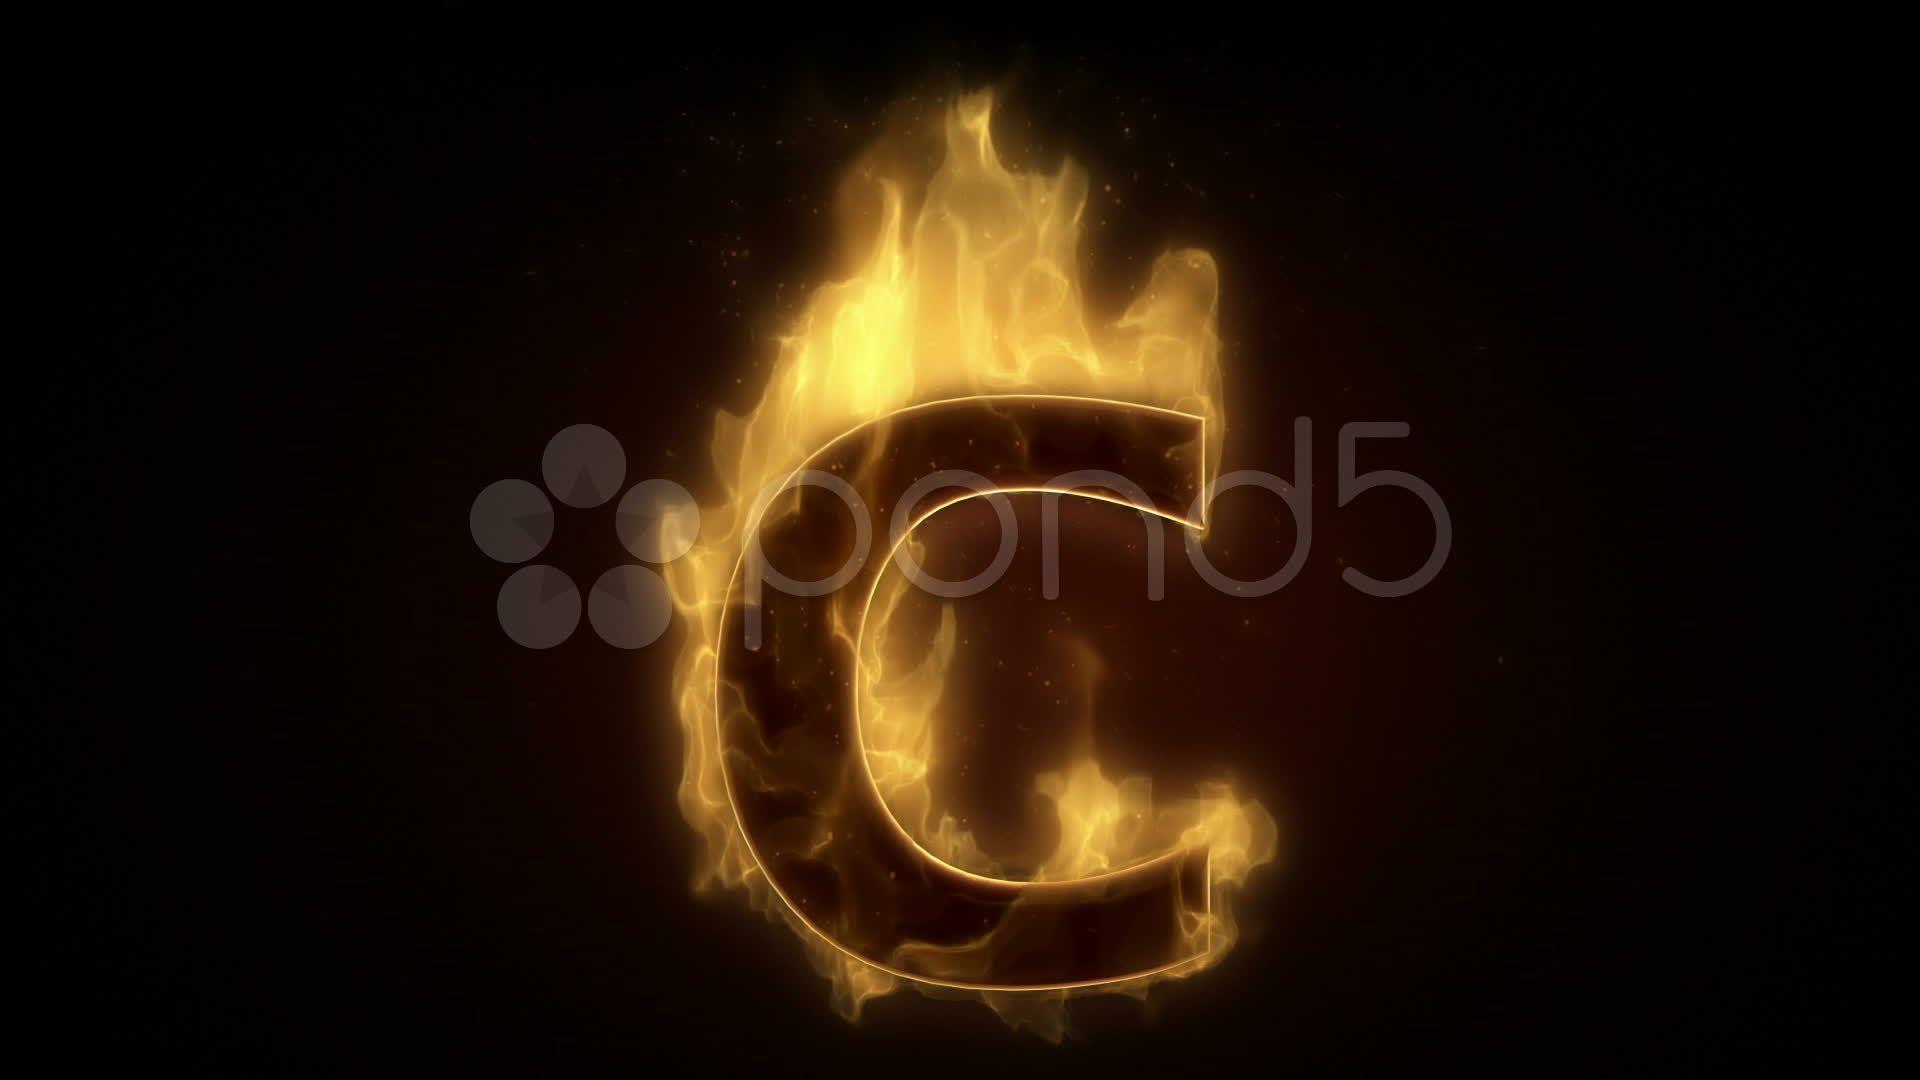 Video: Fiery letter C burning in loop with particles